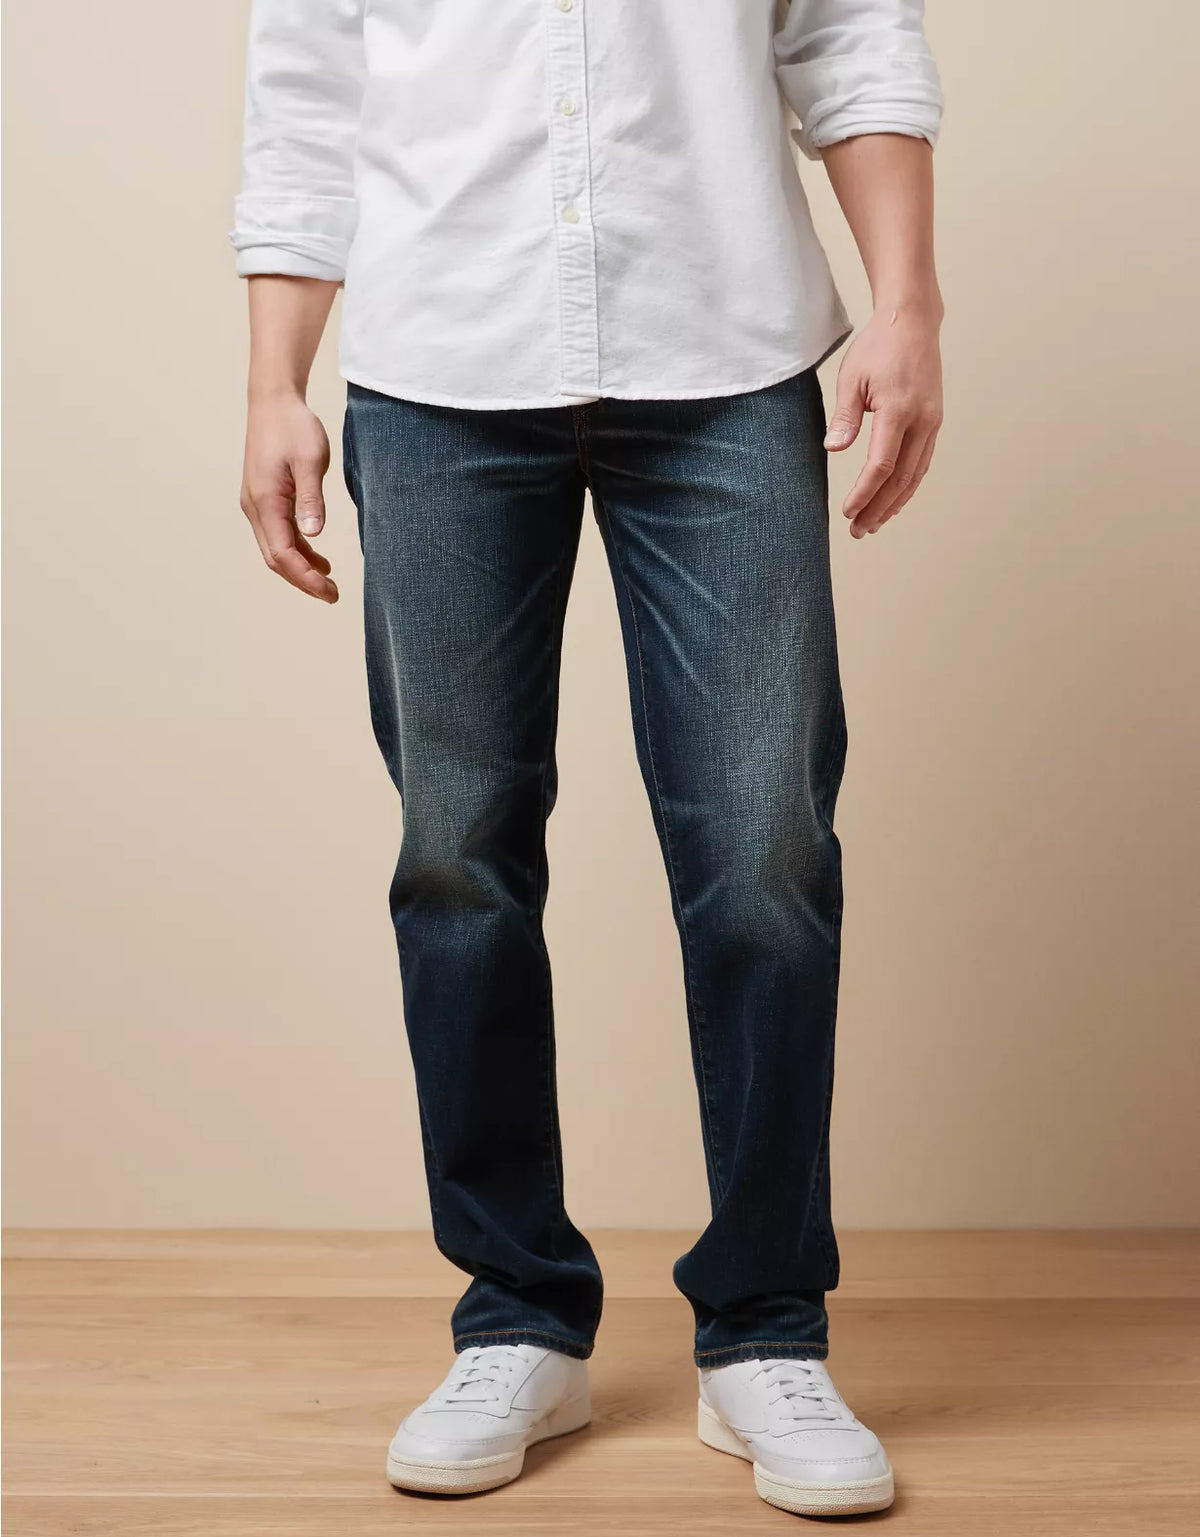 Ace Cart Relaxed Fit Straight Leg Distressed Denim Jeans